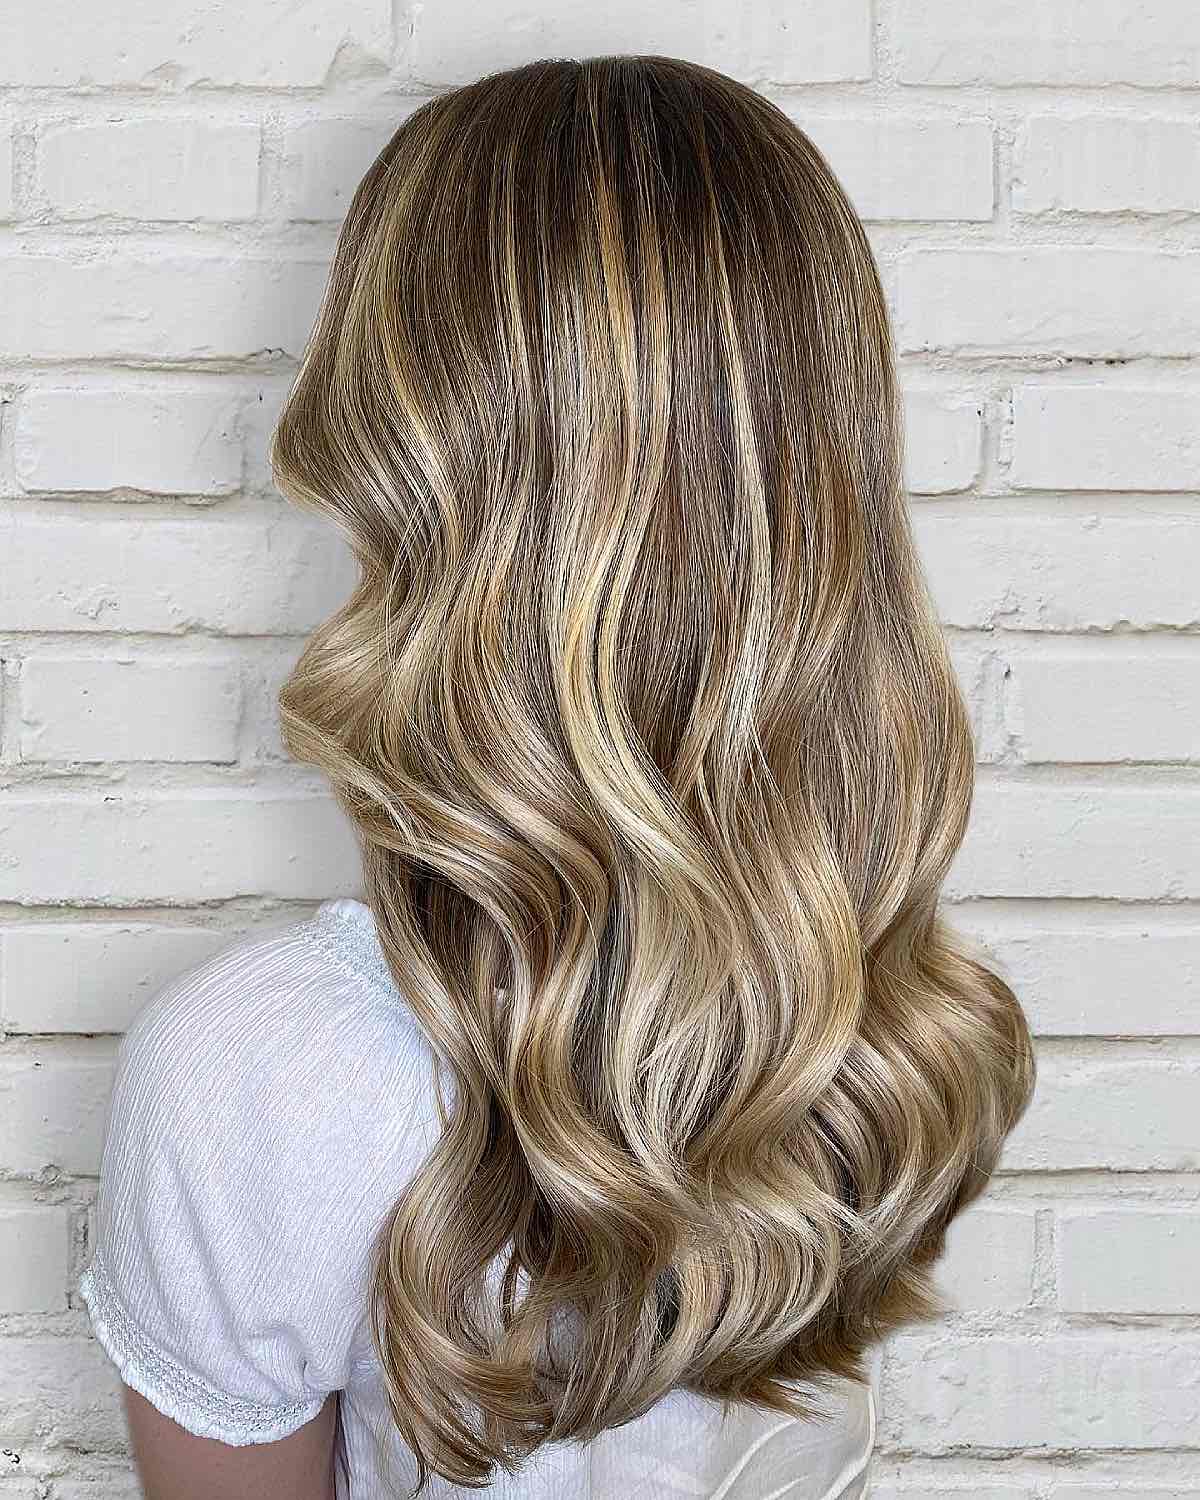 30 Cute Blonde Hair Color Ideas In 2020 Best Shades Of Blonde